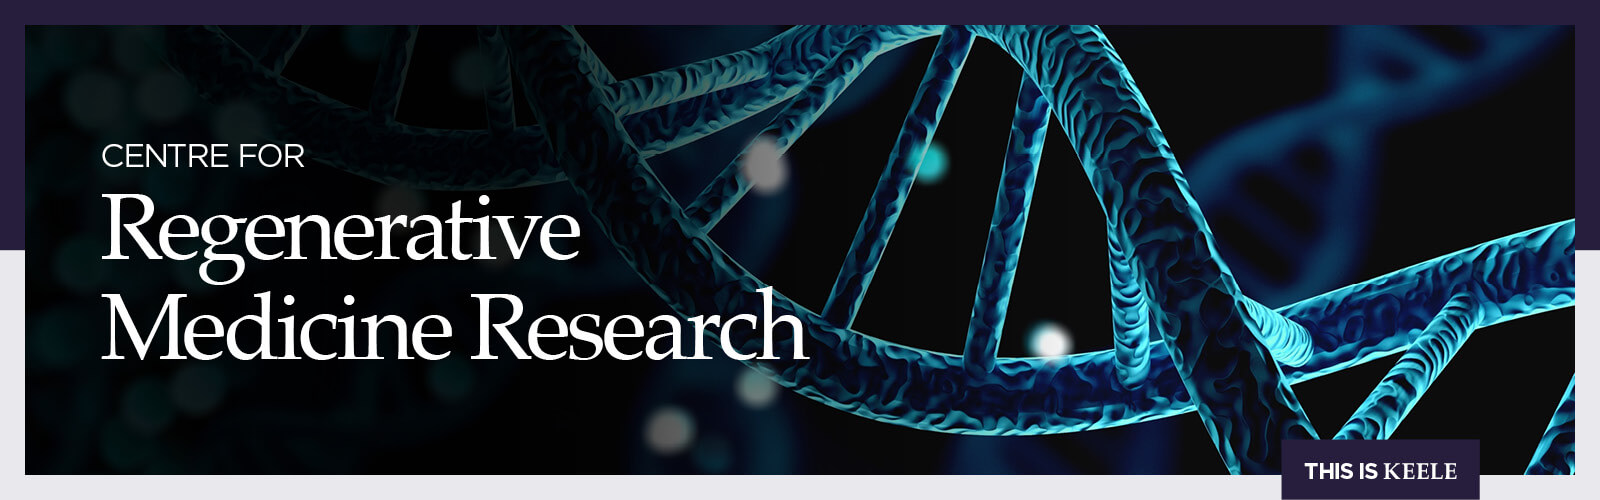 Centre for Regenerative Medicine Research title and image of double helix DNA